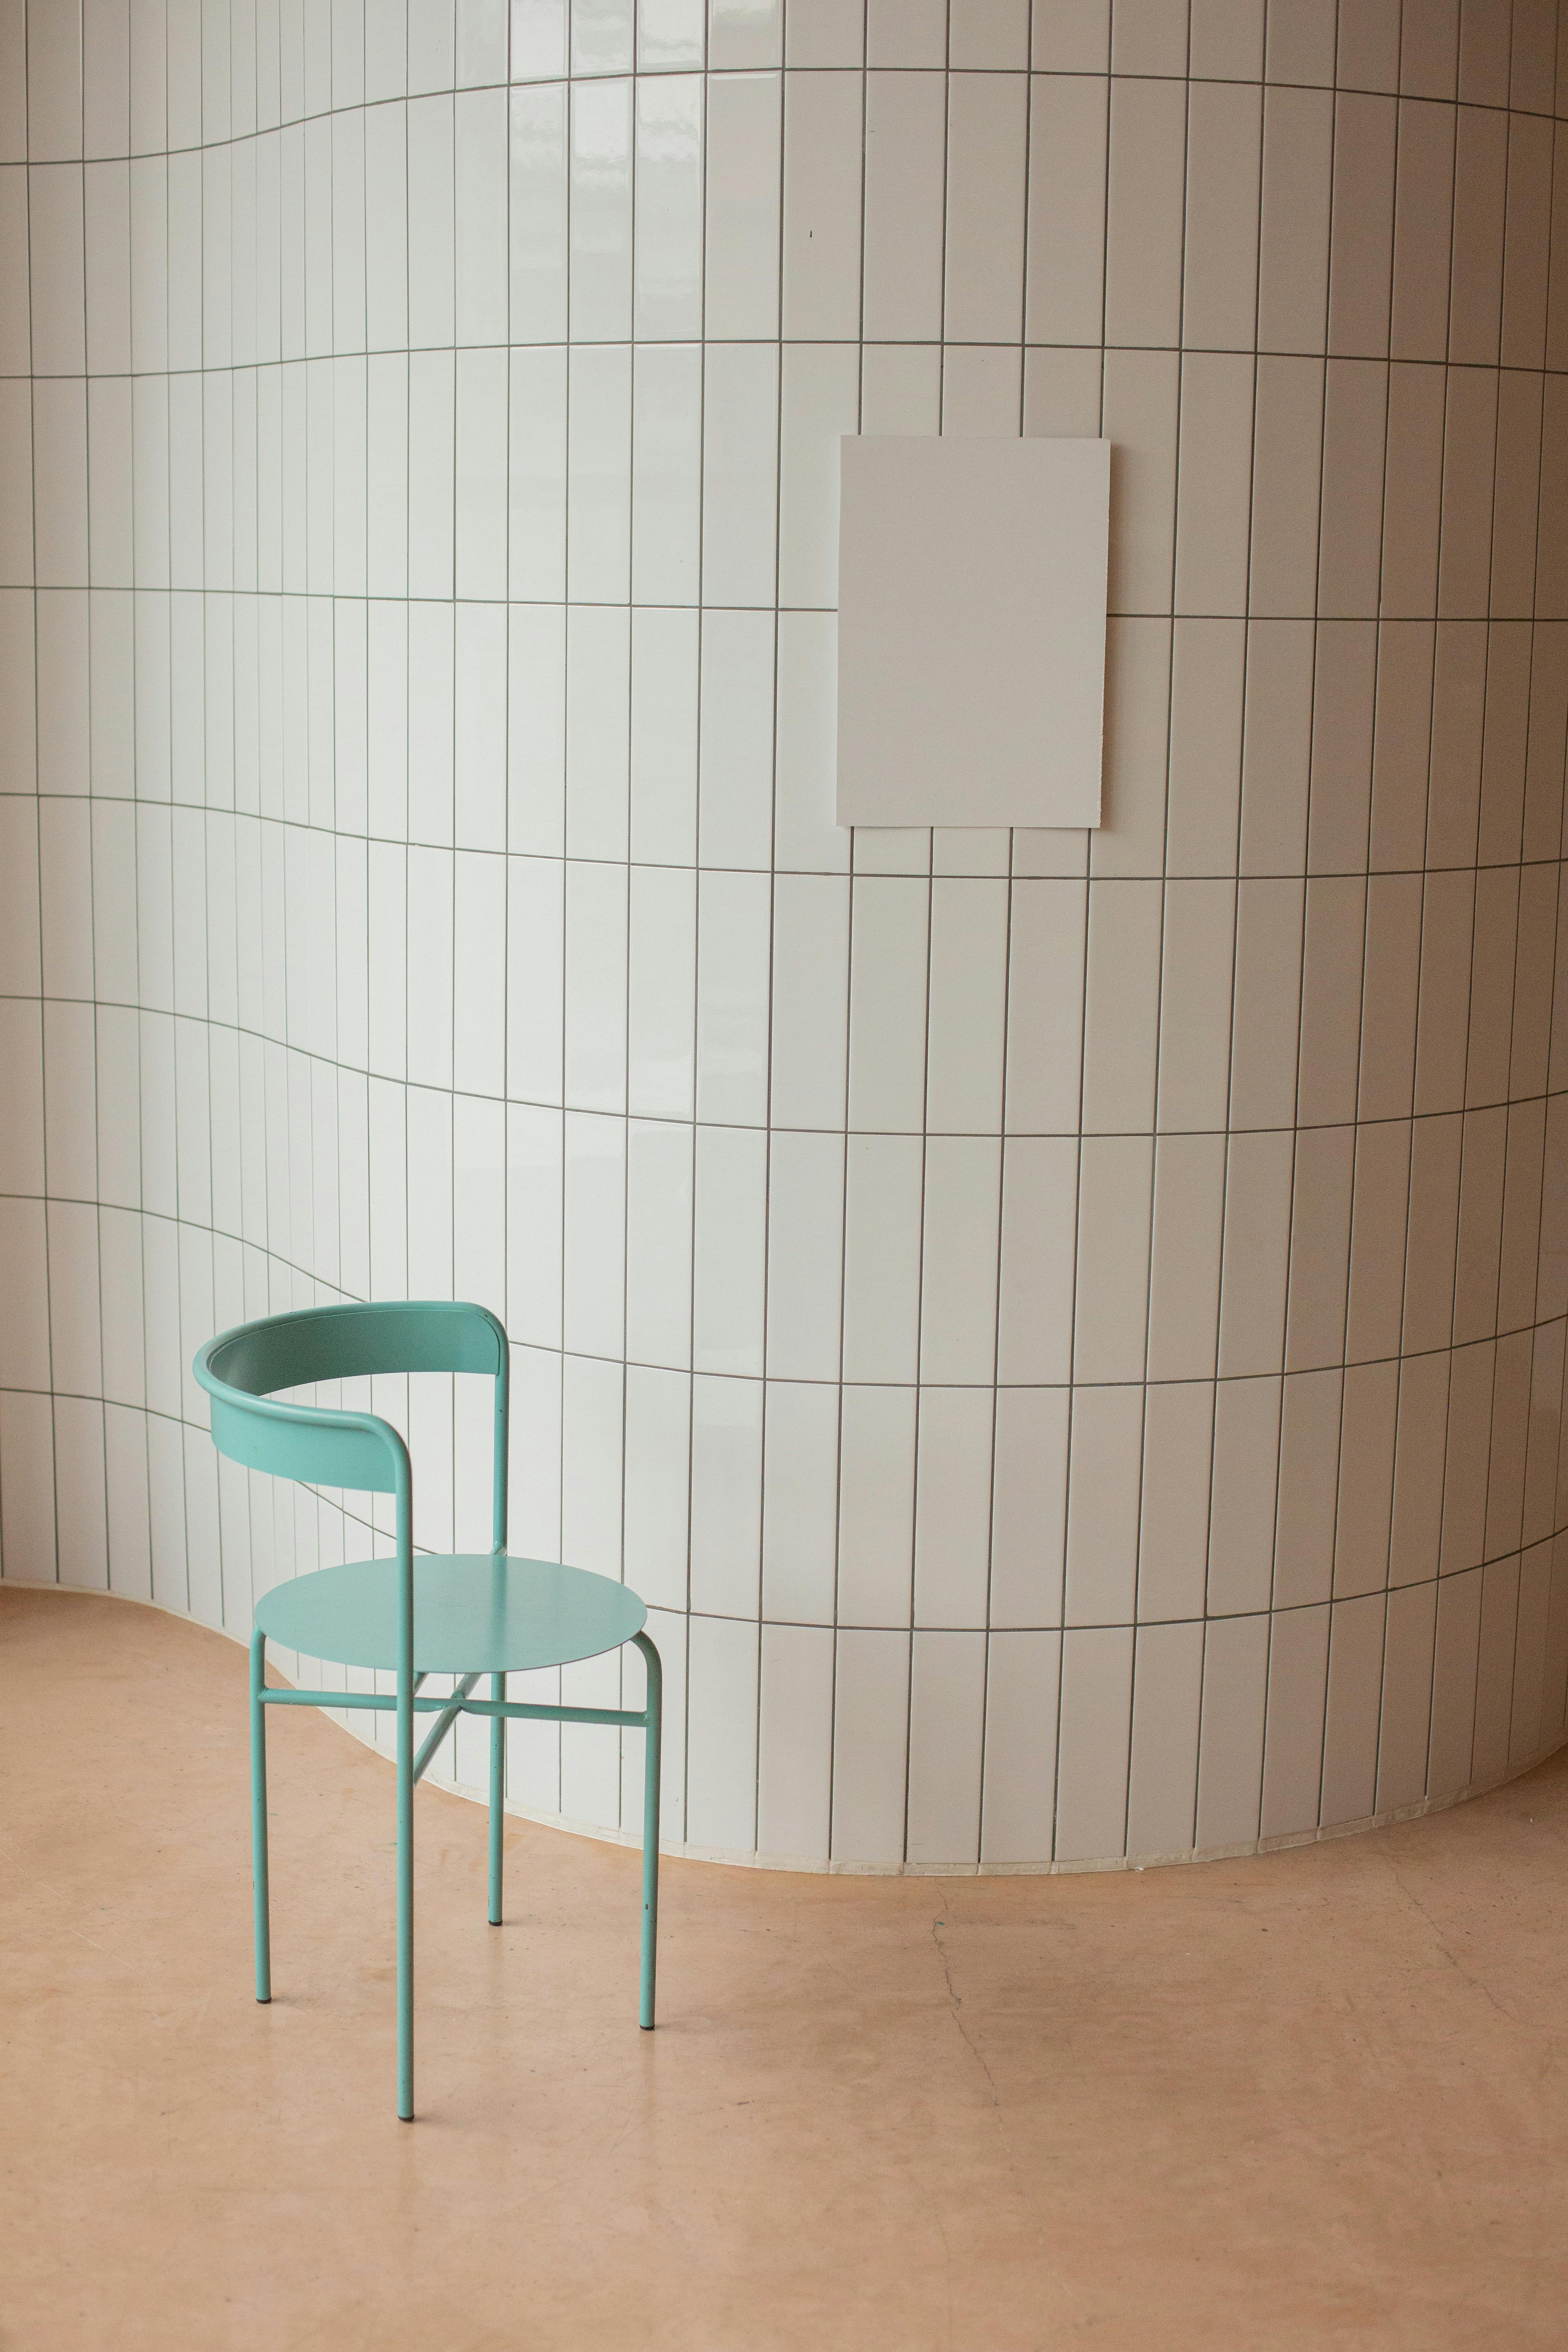 chair near wall with ceramic tile and white placard